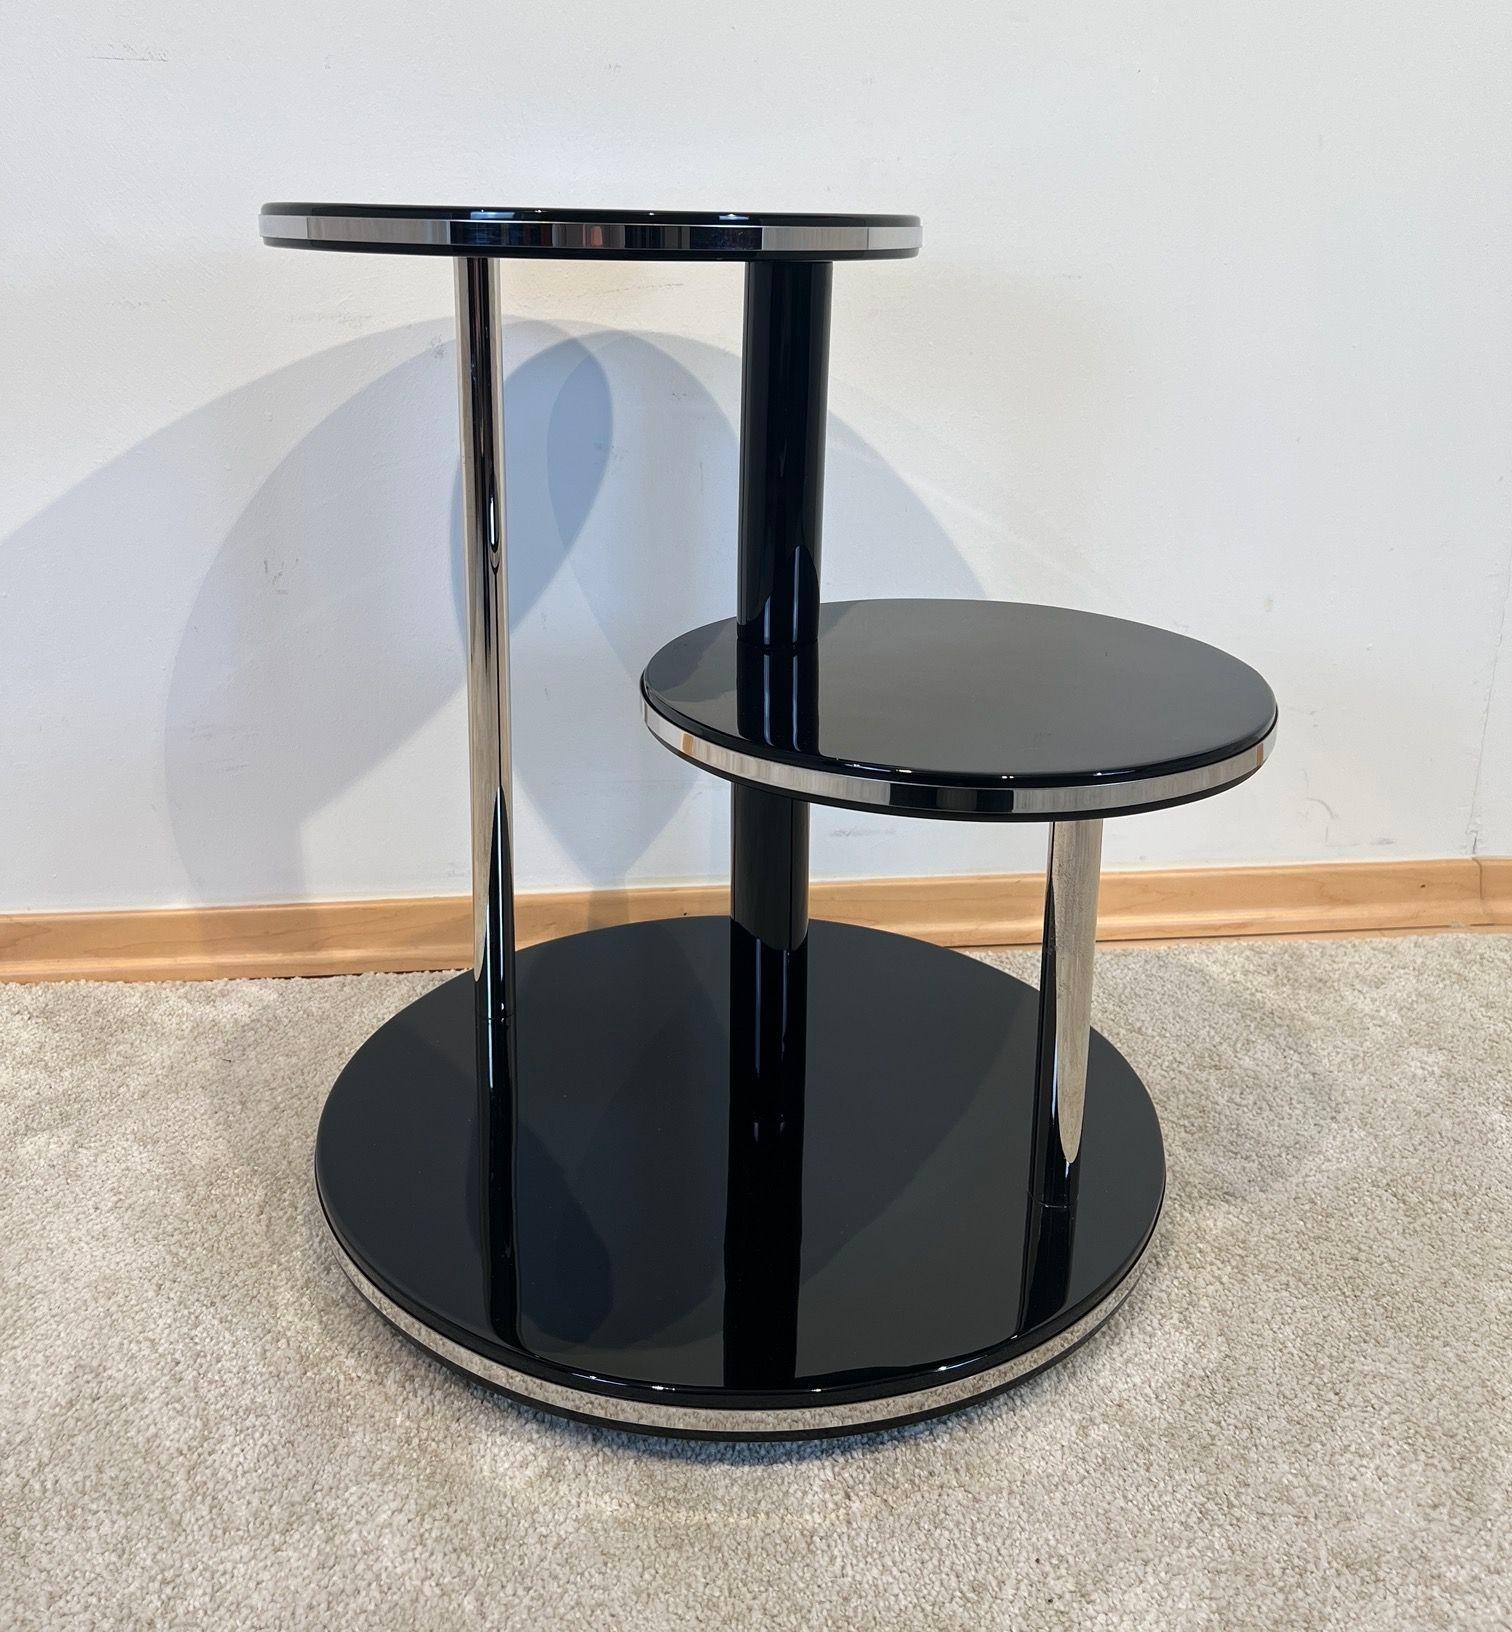 Art Deco Round Side Table, Black Lacquer, Chrome, Metal Trims, France circa 1930 For Sale 2